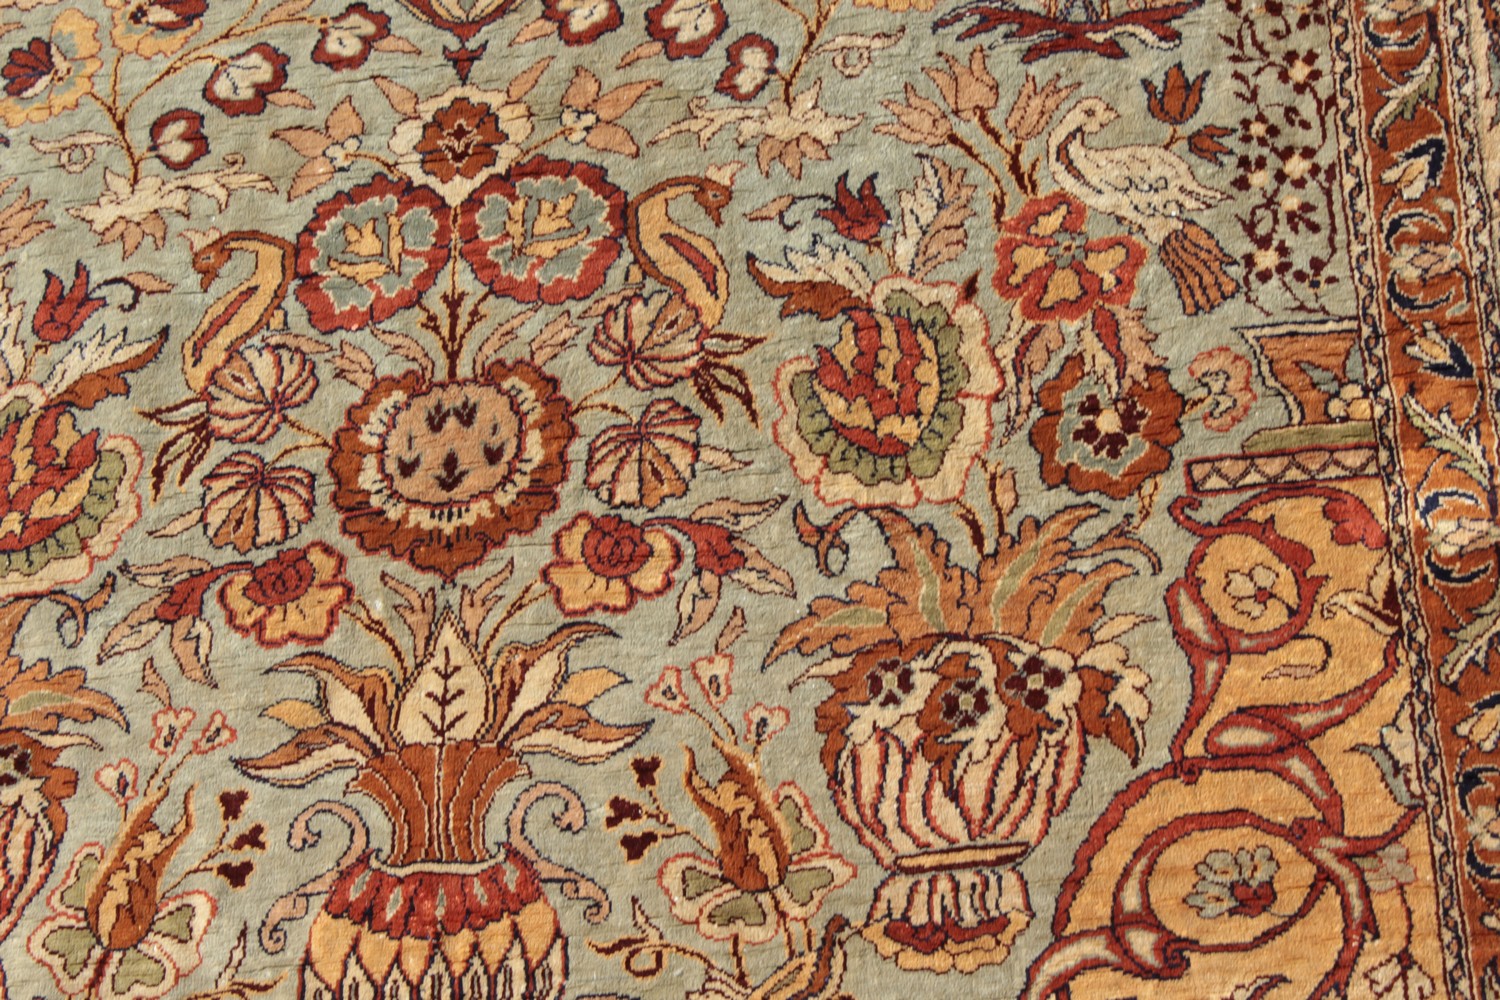 A FINE TURKISH SILK RUG with allover pattern of birds and flowers. 6ft 10ins x 4ft 3ins. - Image 3 of 17